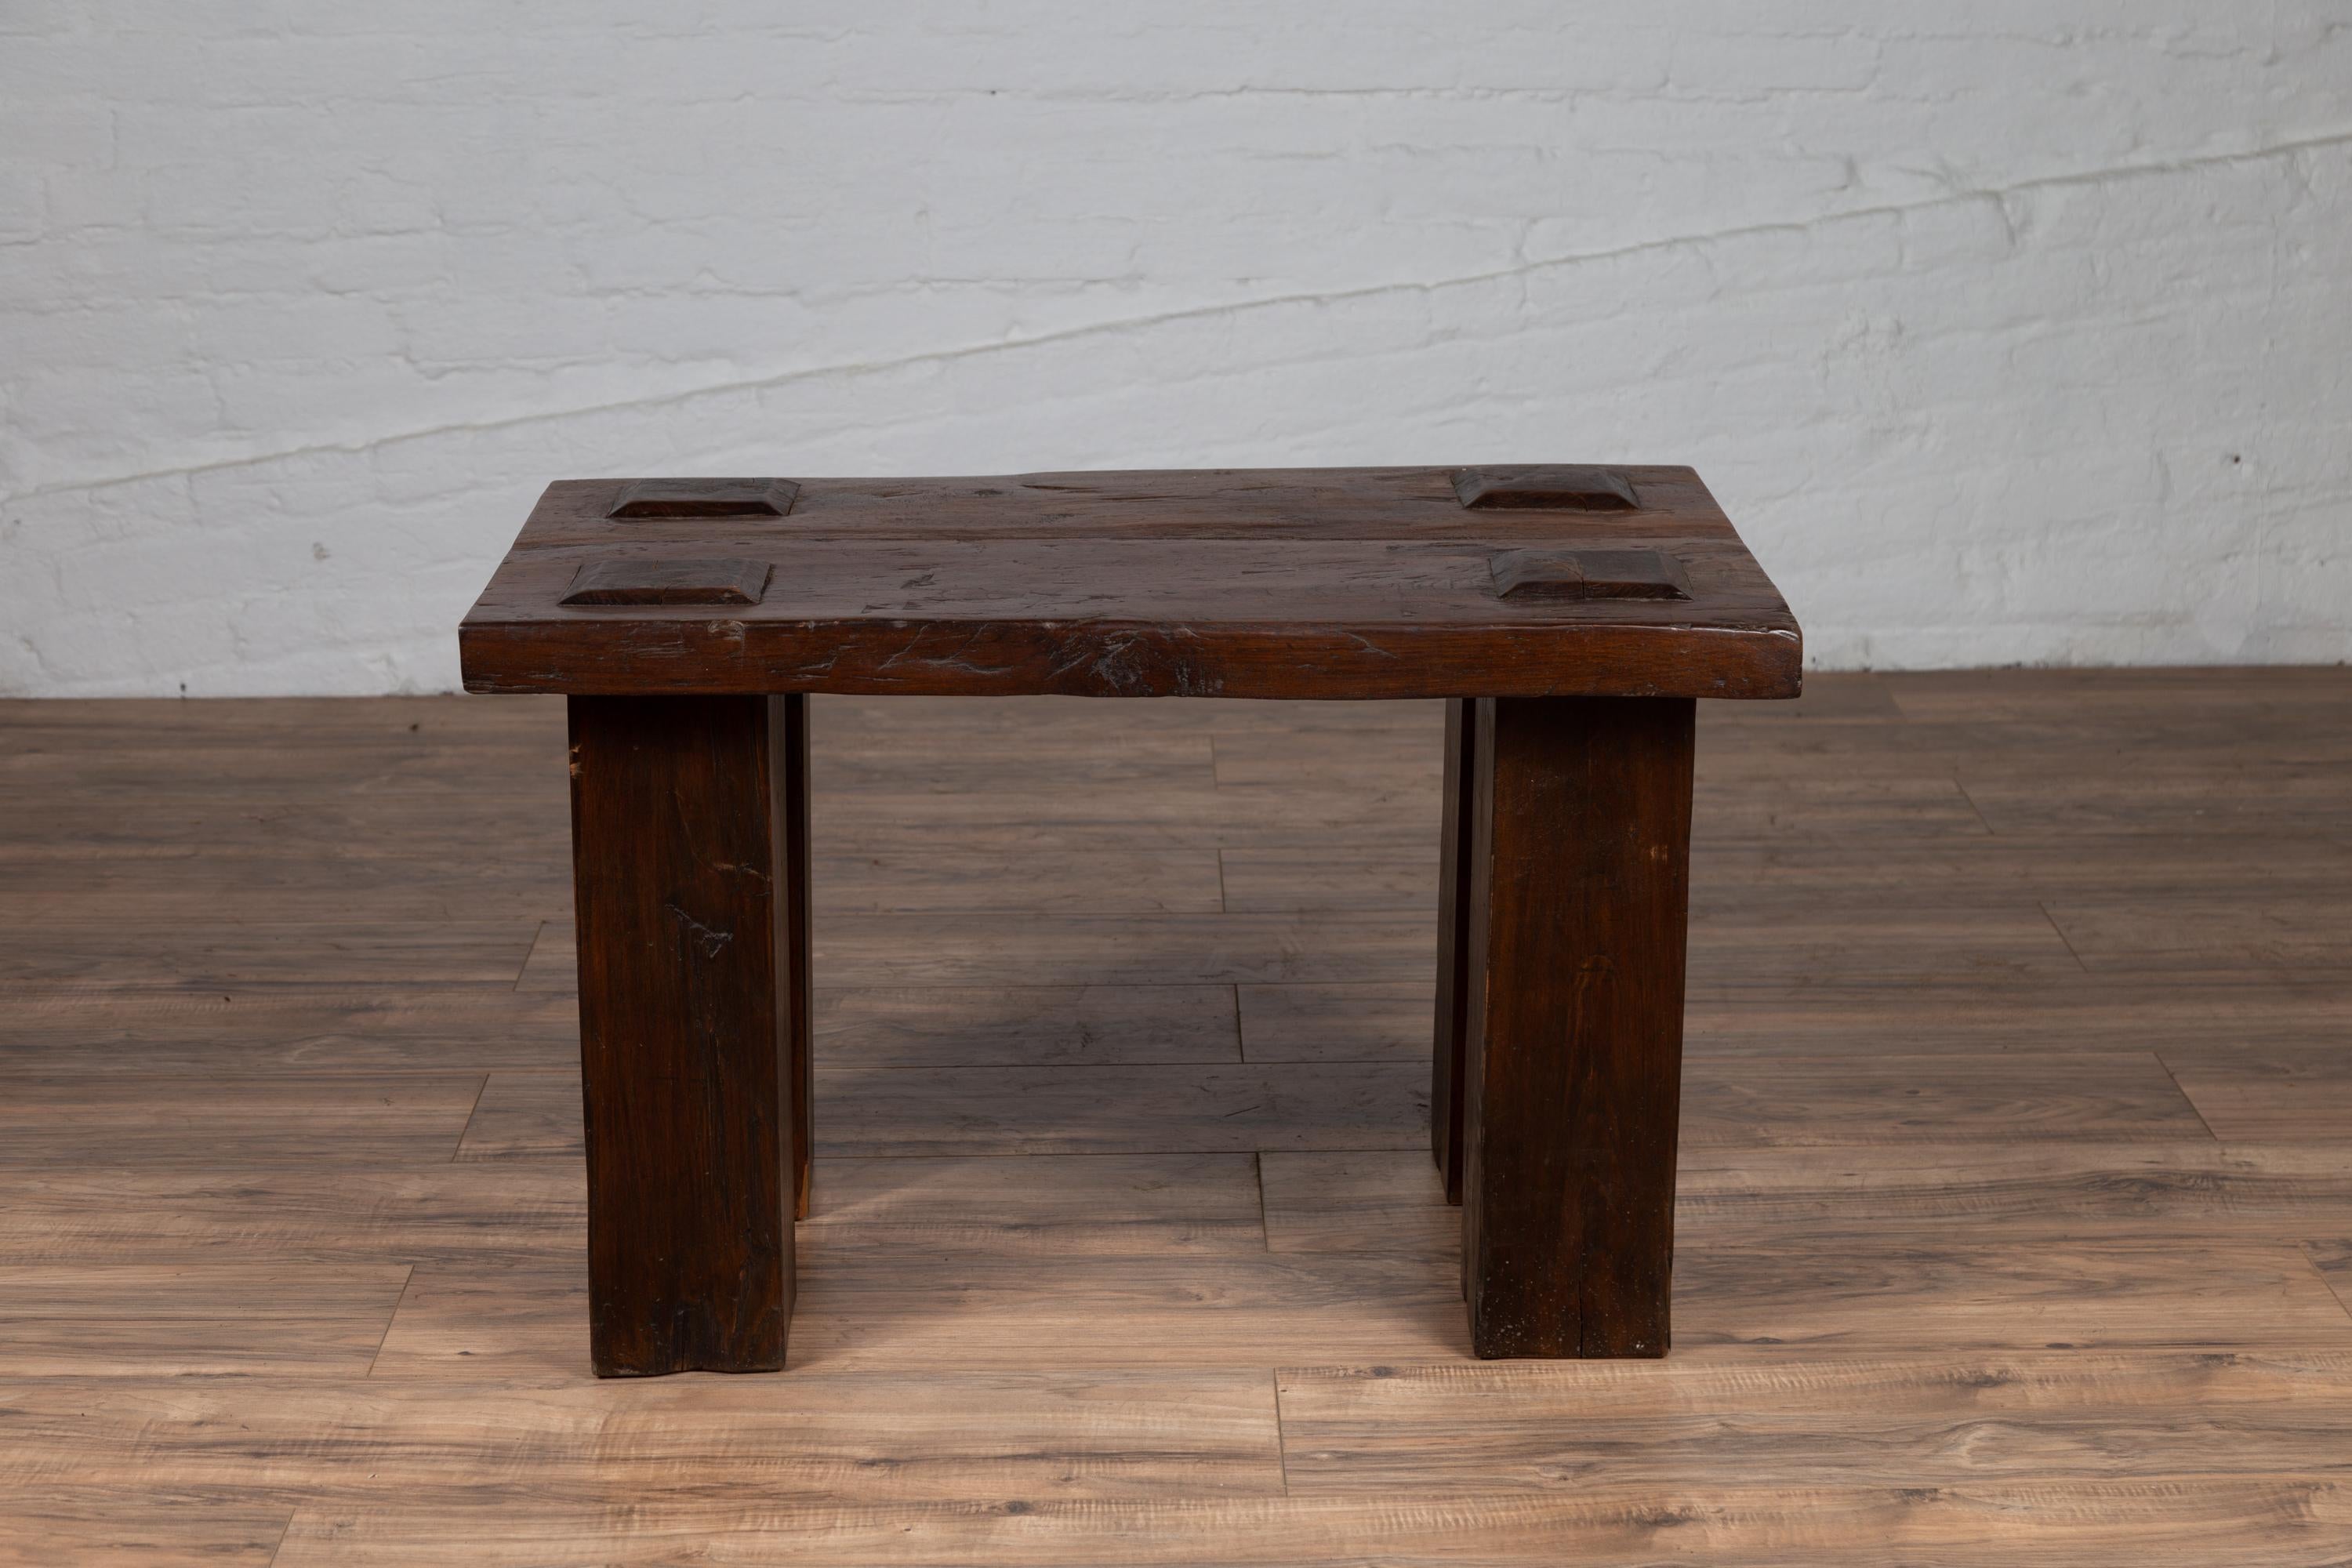 A vintage Indonesian wooden bench from the mid-20th century, with raised motifs and straight legs. Born in Indonesia during the midcentury period, this wooden bench charms us with its rustic presence and simple lines. Featuring a rectangular planked